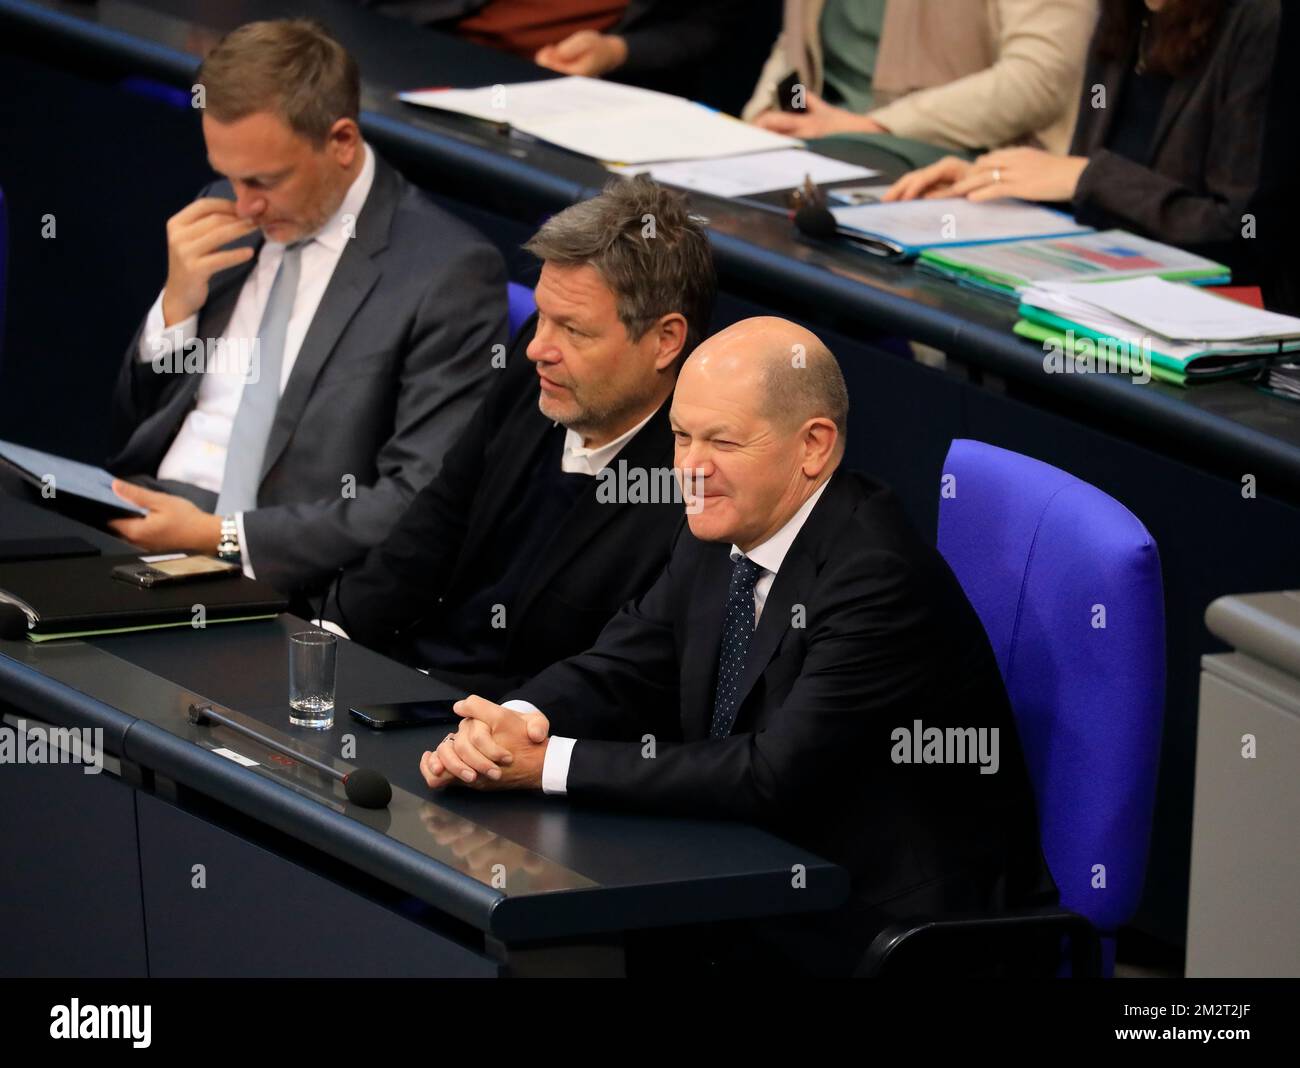 Berlin, Germany, 14 Dec 2022.The German Chancellor, Olaf Scholz, during ...